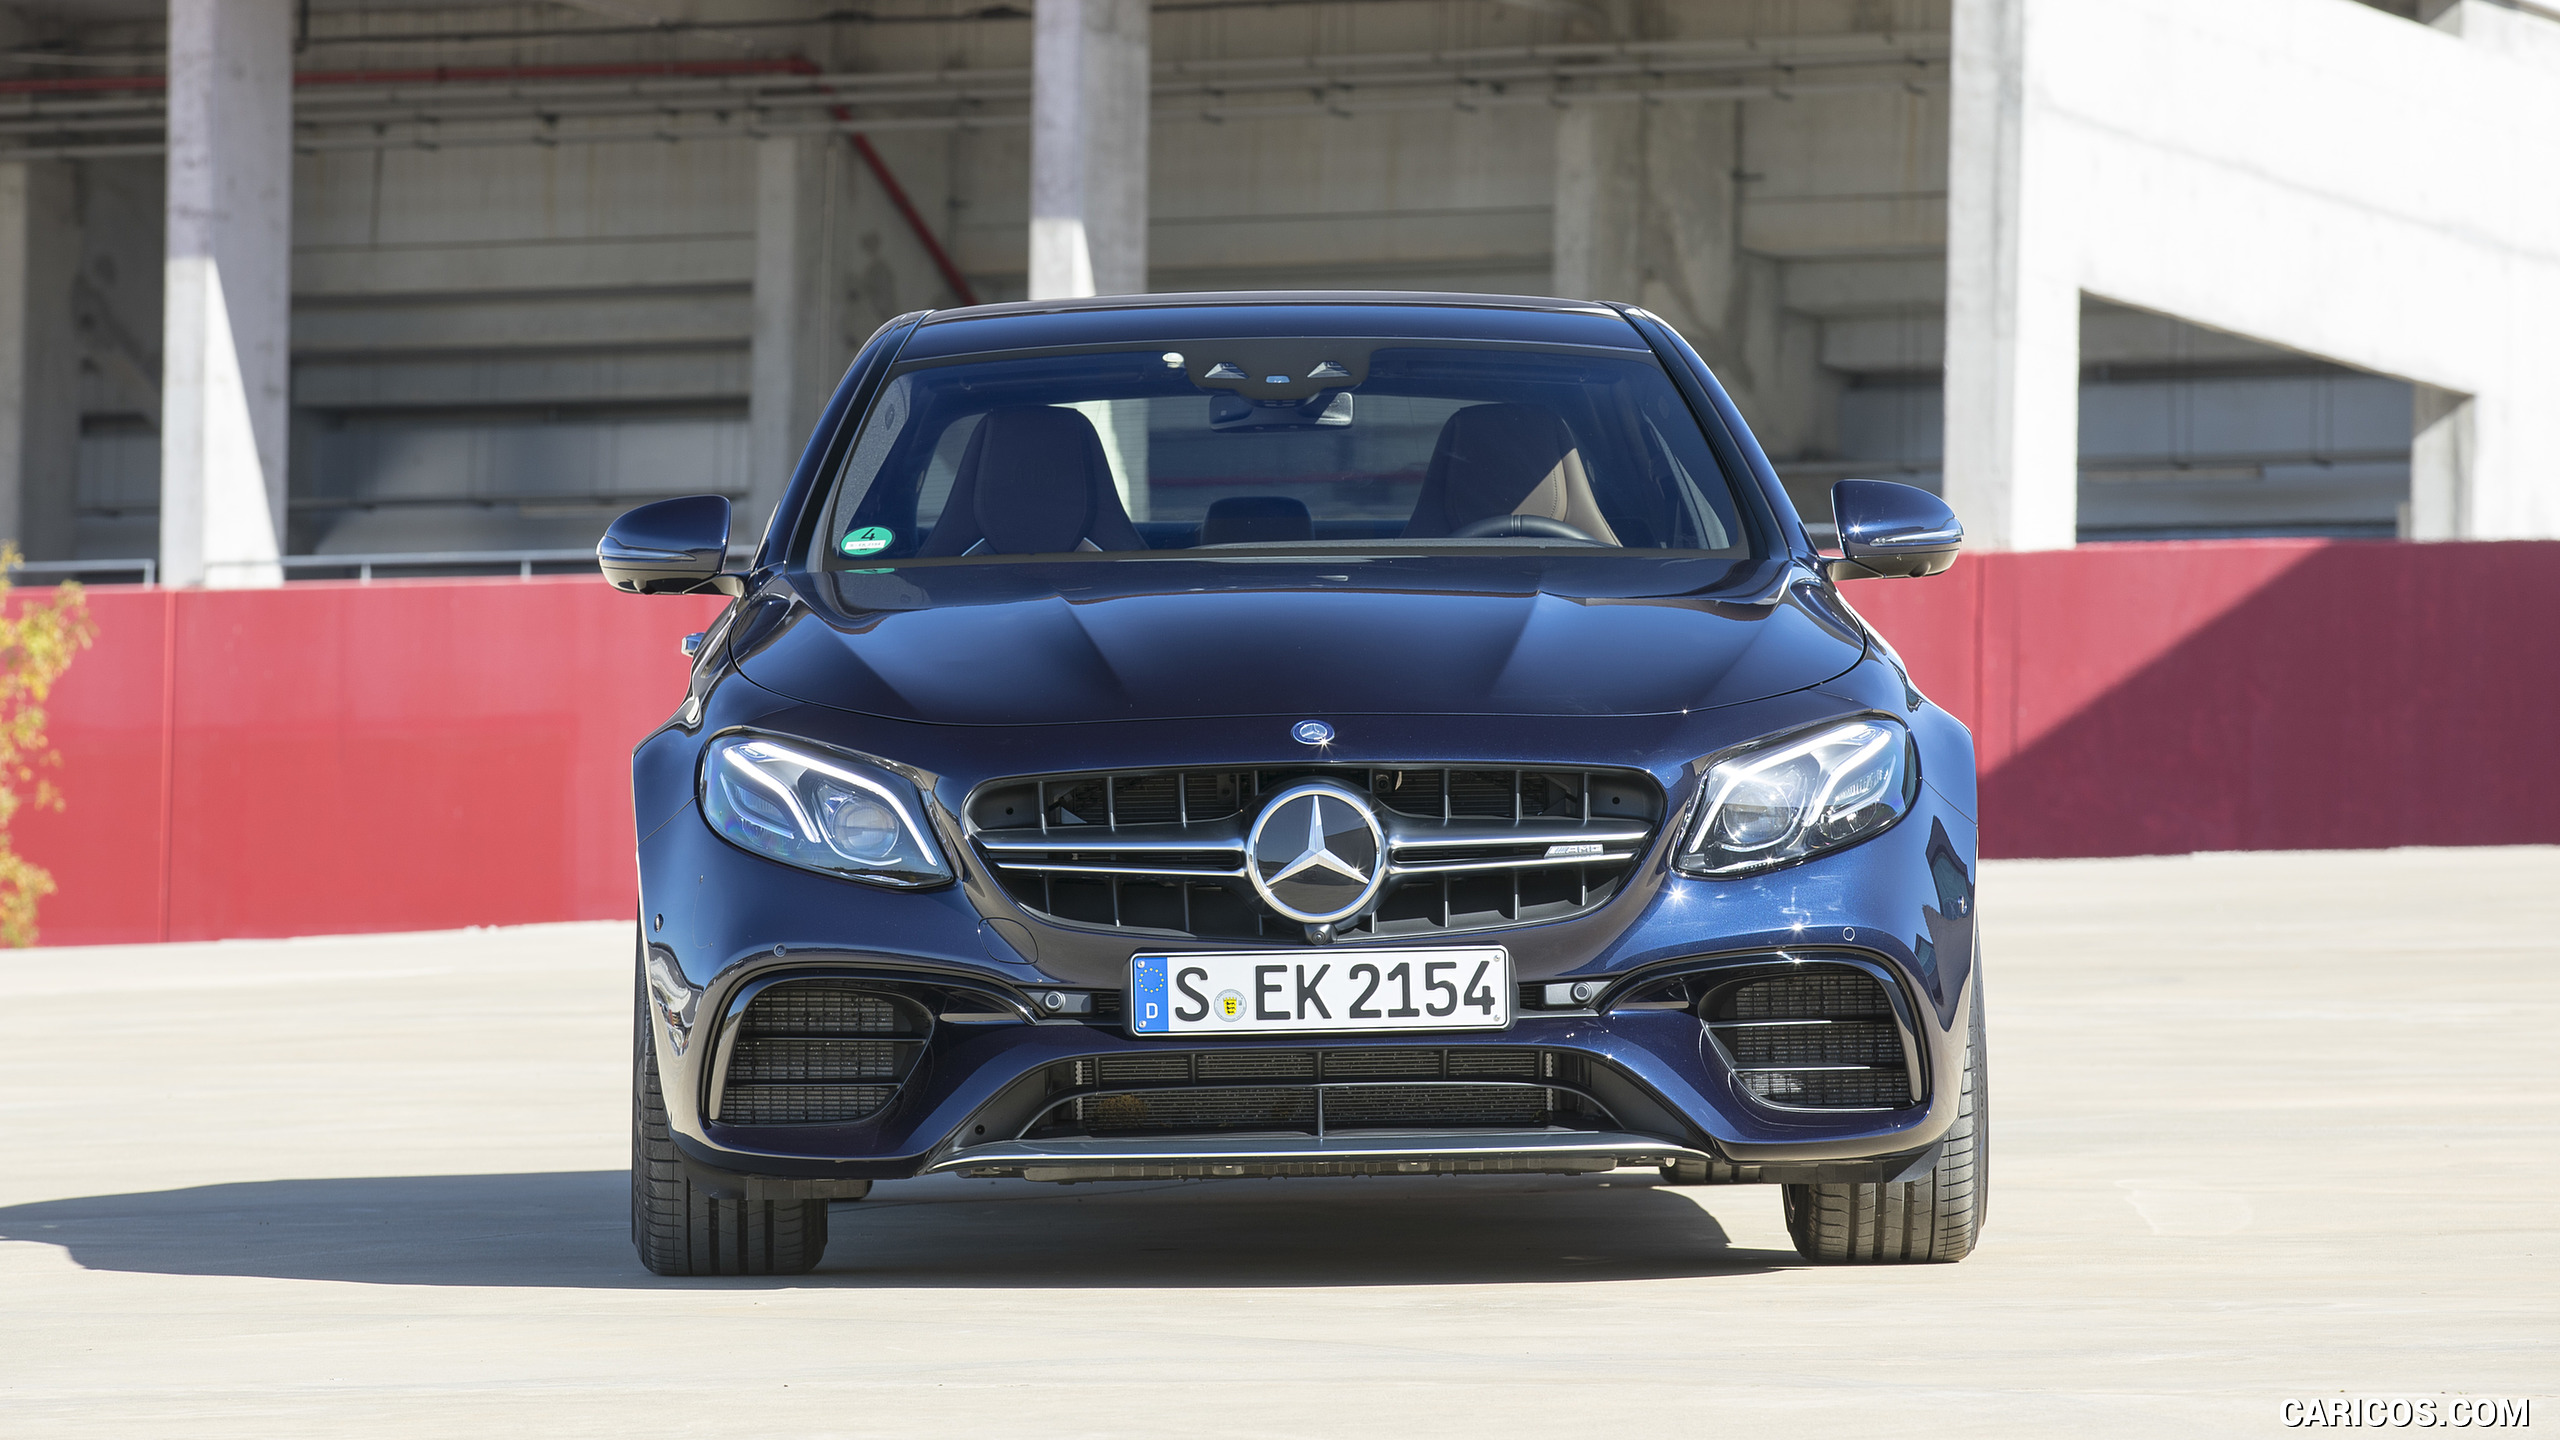 2018 Mercedes-AMG E63 S 4MATIC+ - Front, #194 of 323